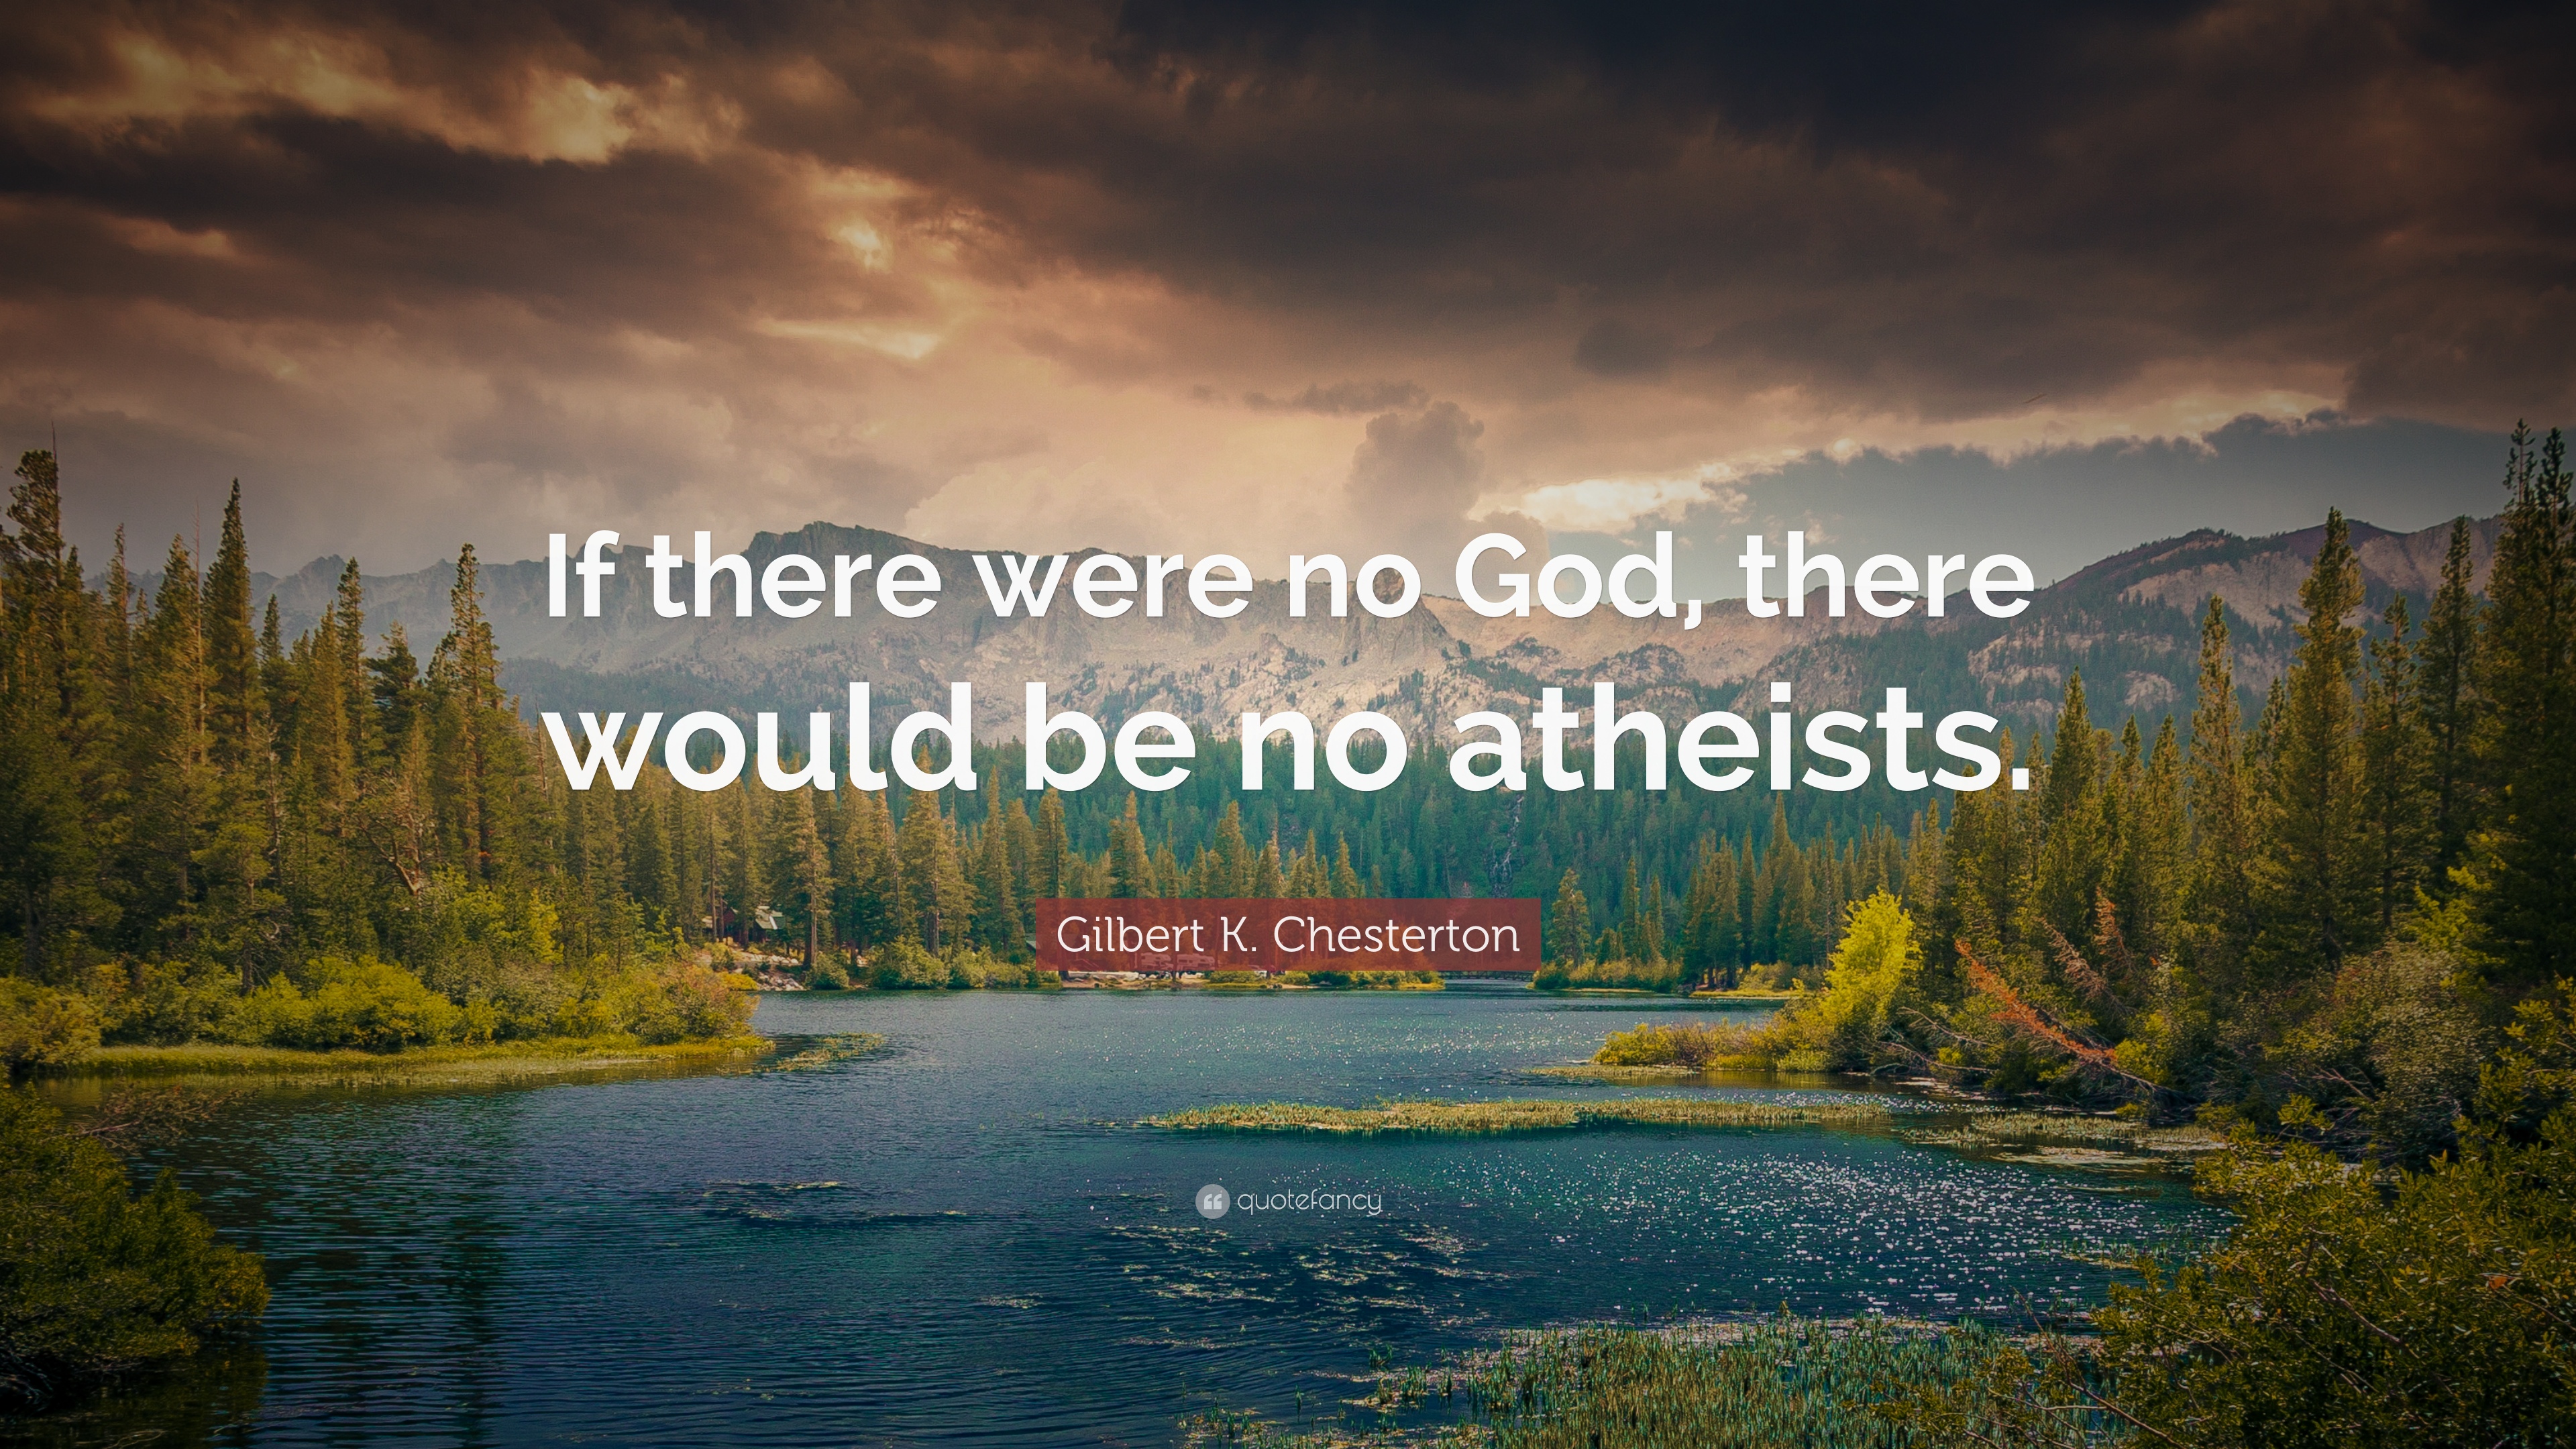 164708-Gilbert-K-Chesterton-Quote-If-there-were-no-God-there-would-be-no.jpg